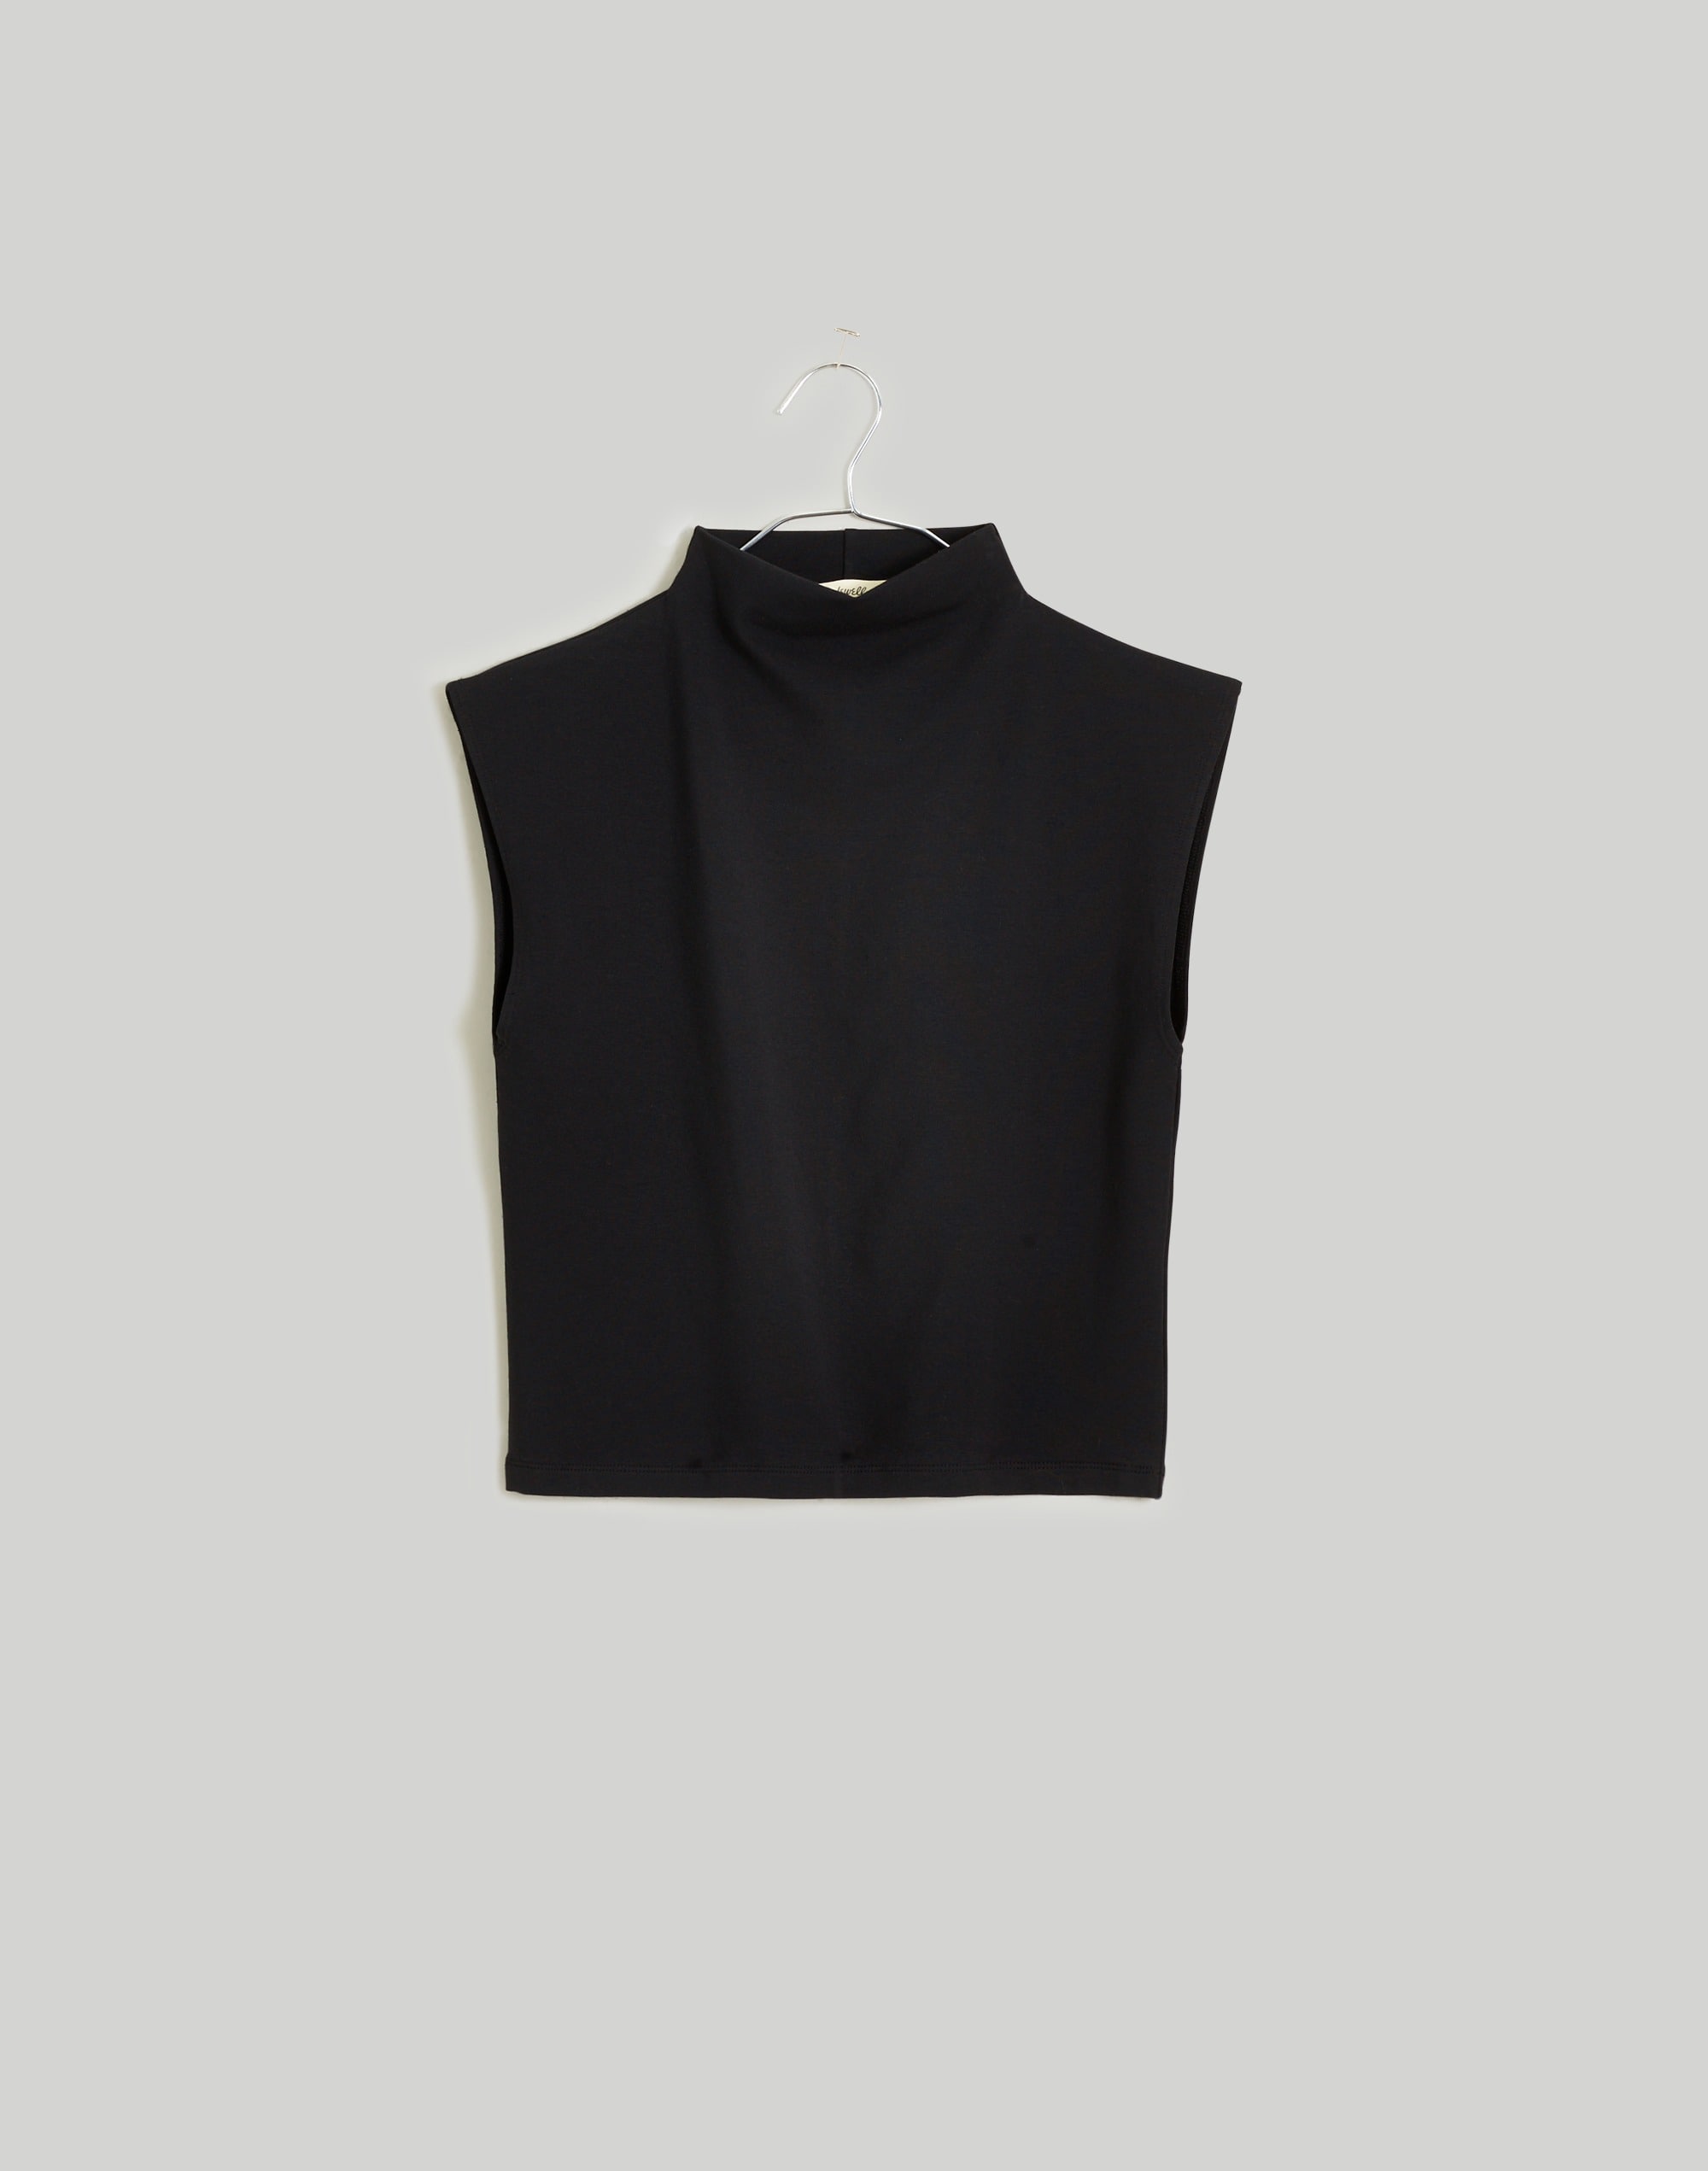 Funnelneck Cropped Muscle Tee